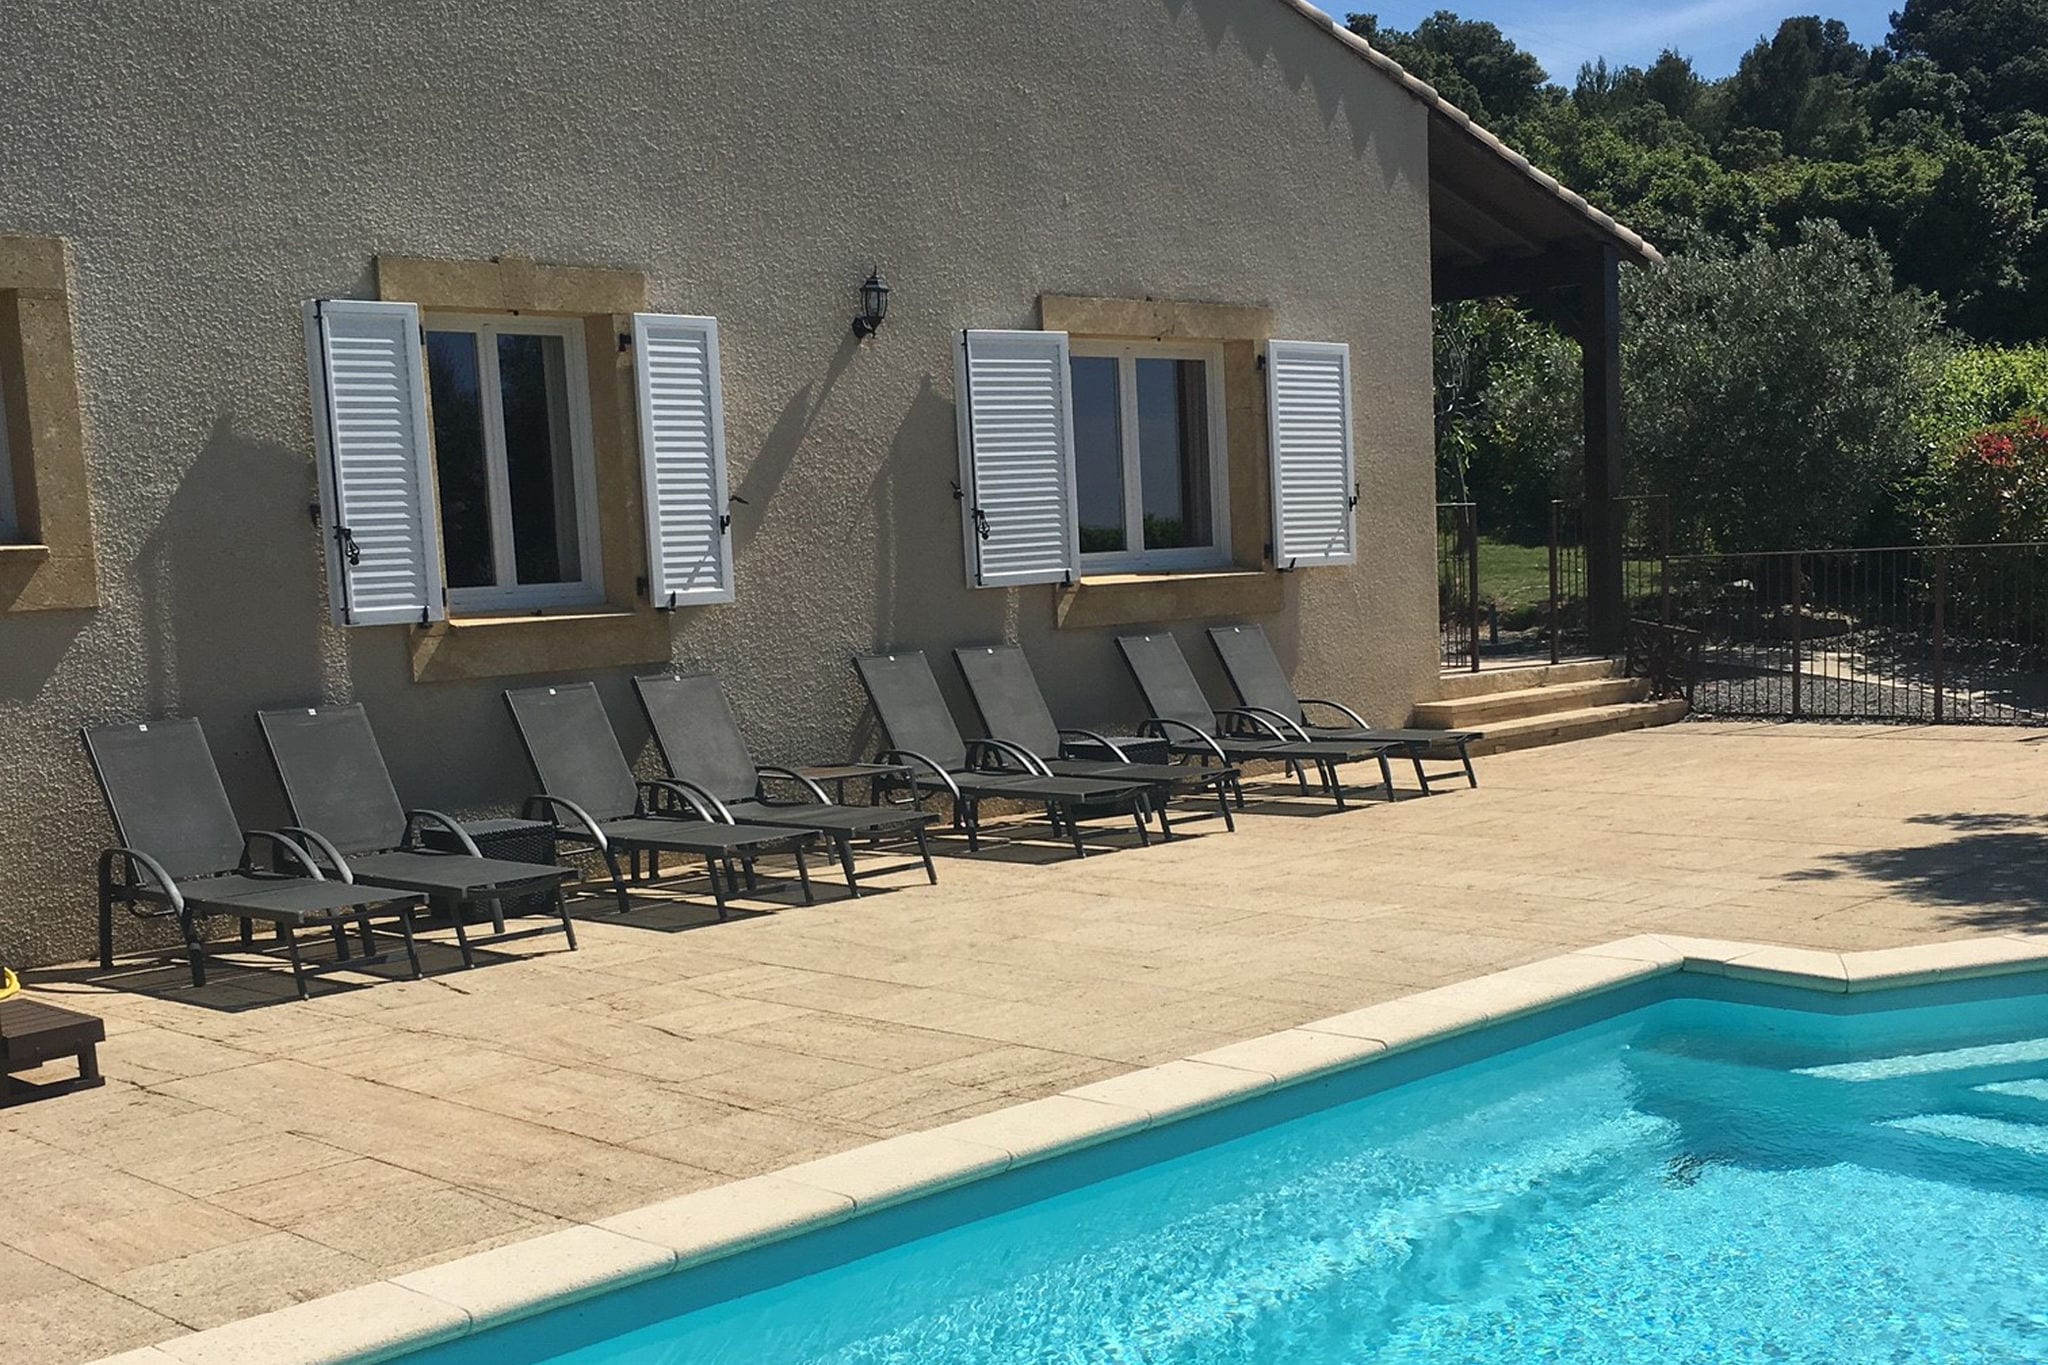 Detached villa in the South of France with a heated private pool, hot tub